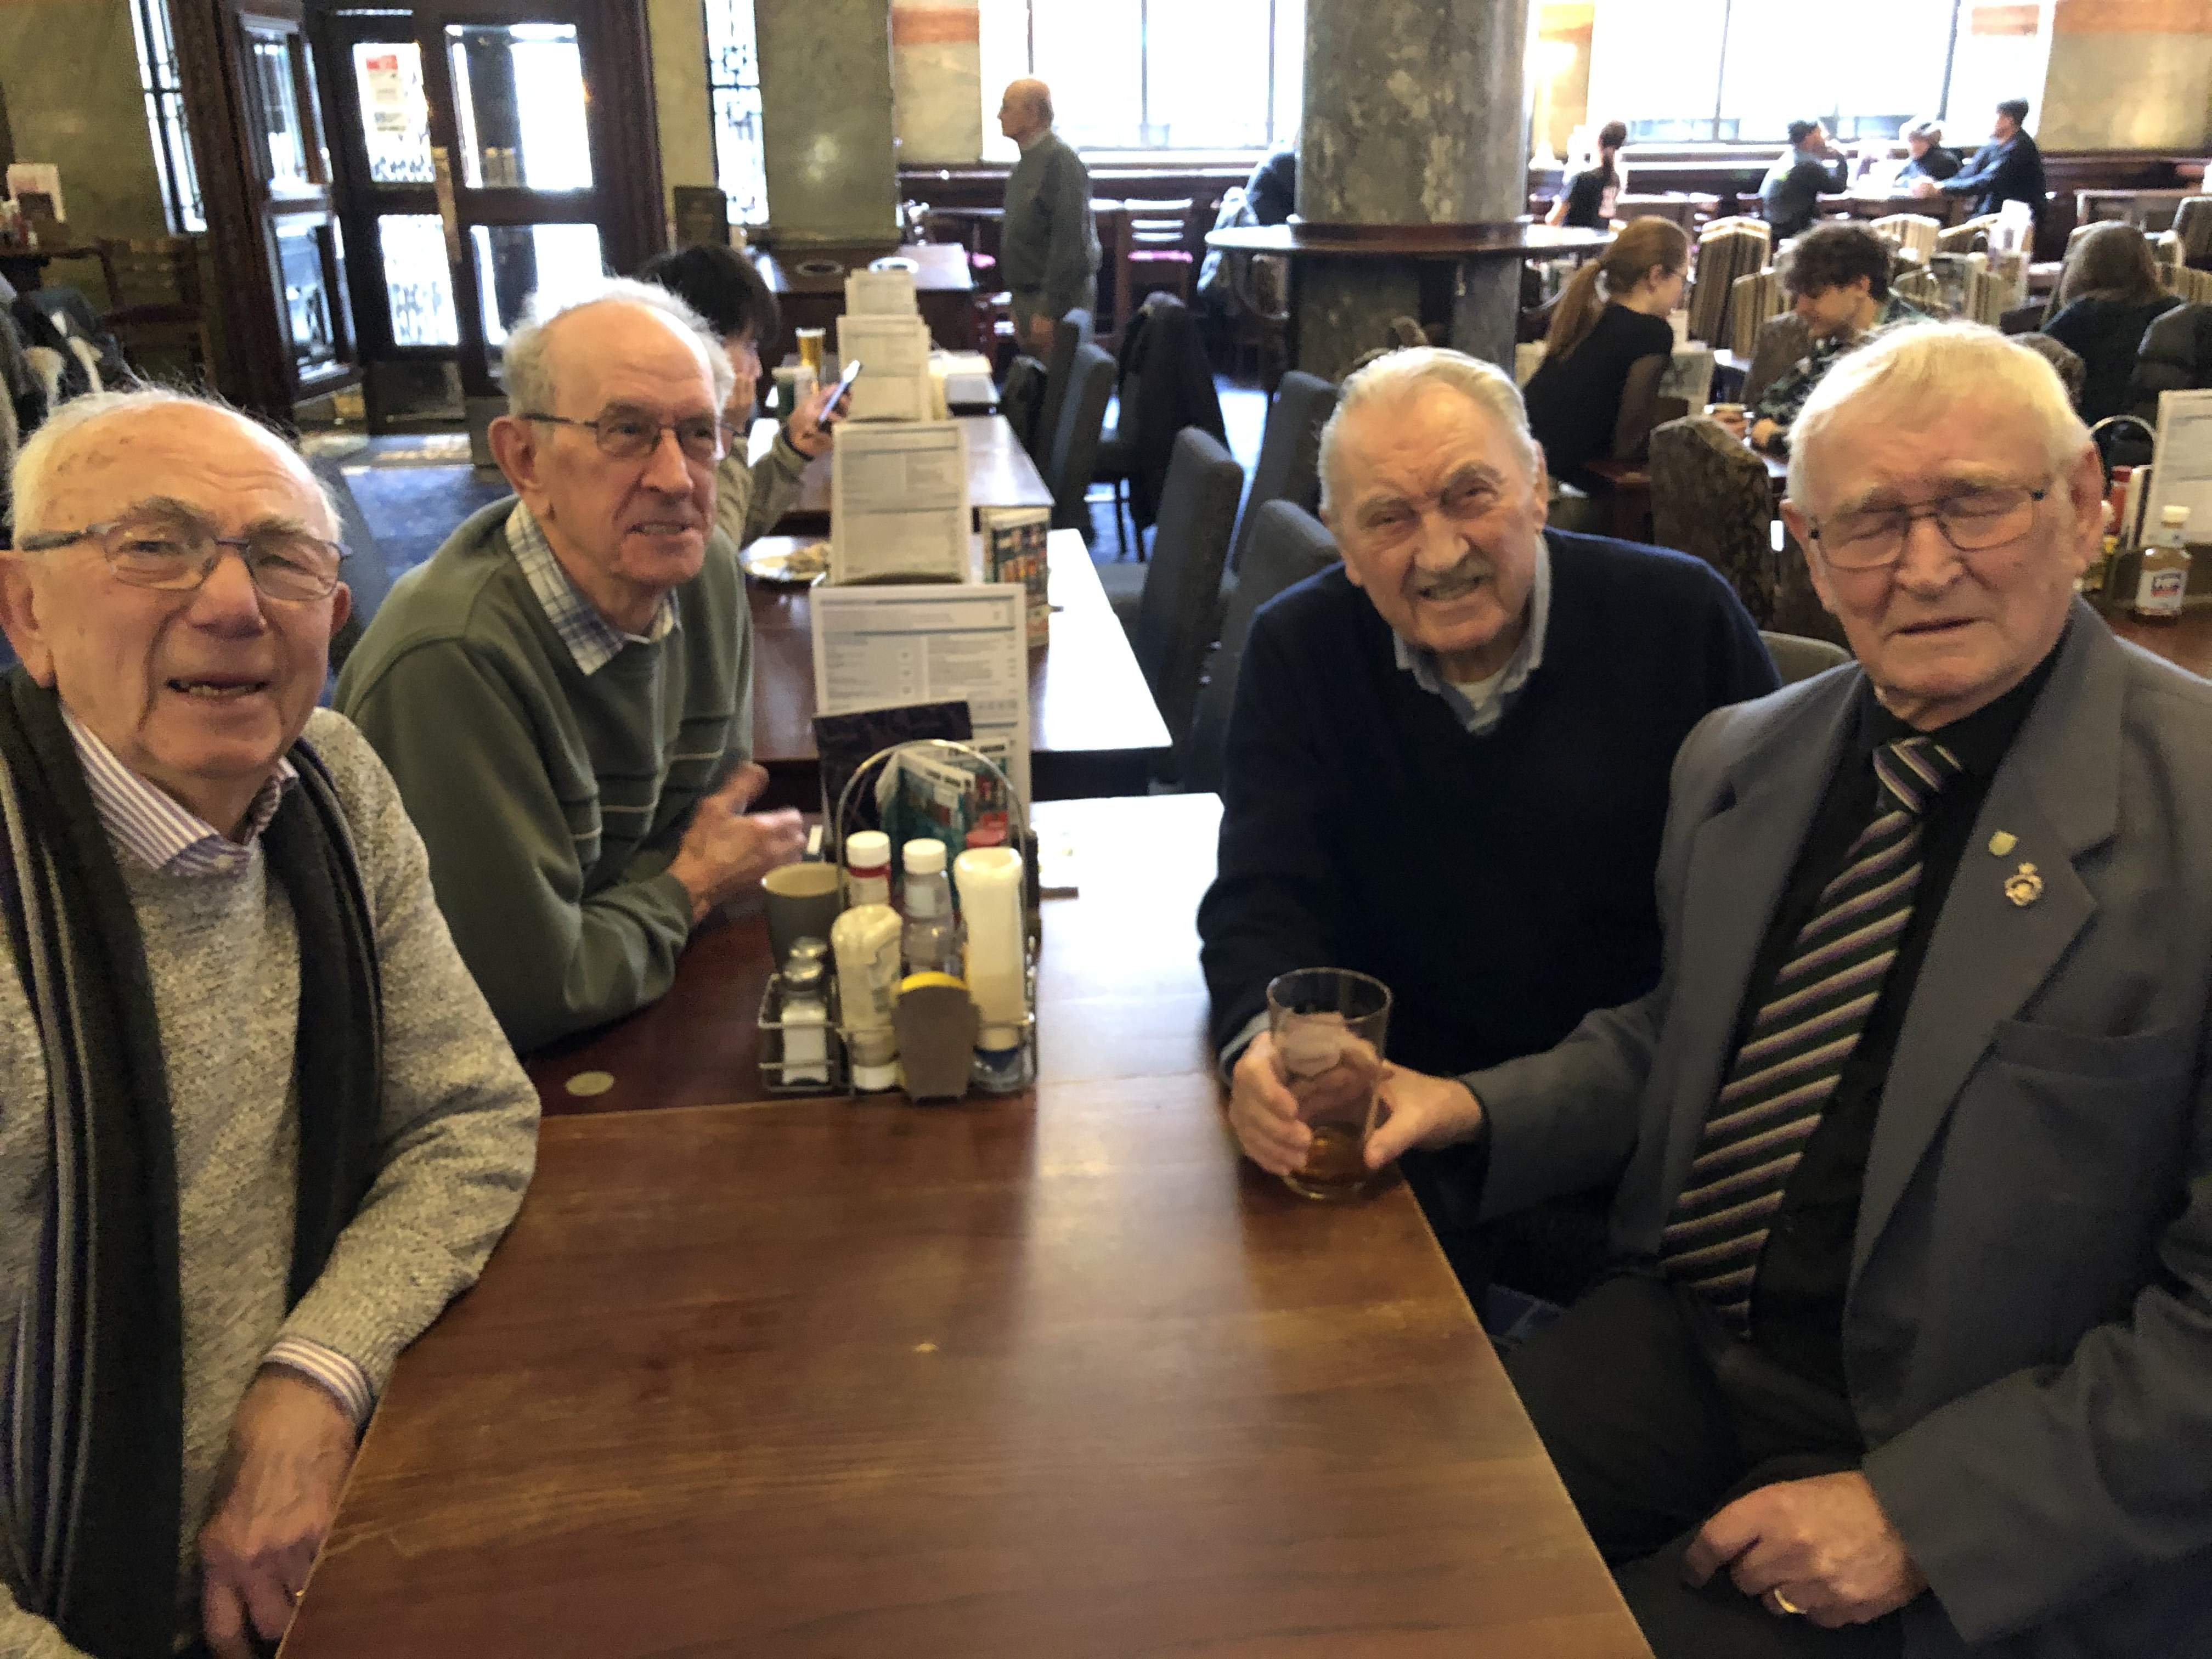 Dave Parry, Stan Chambers, Ted Clark, George Nash